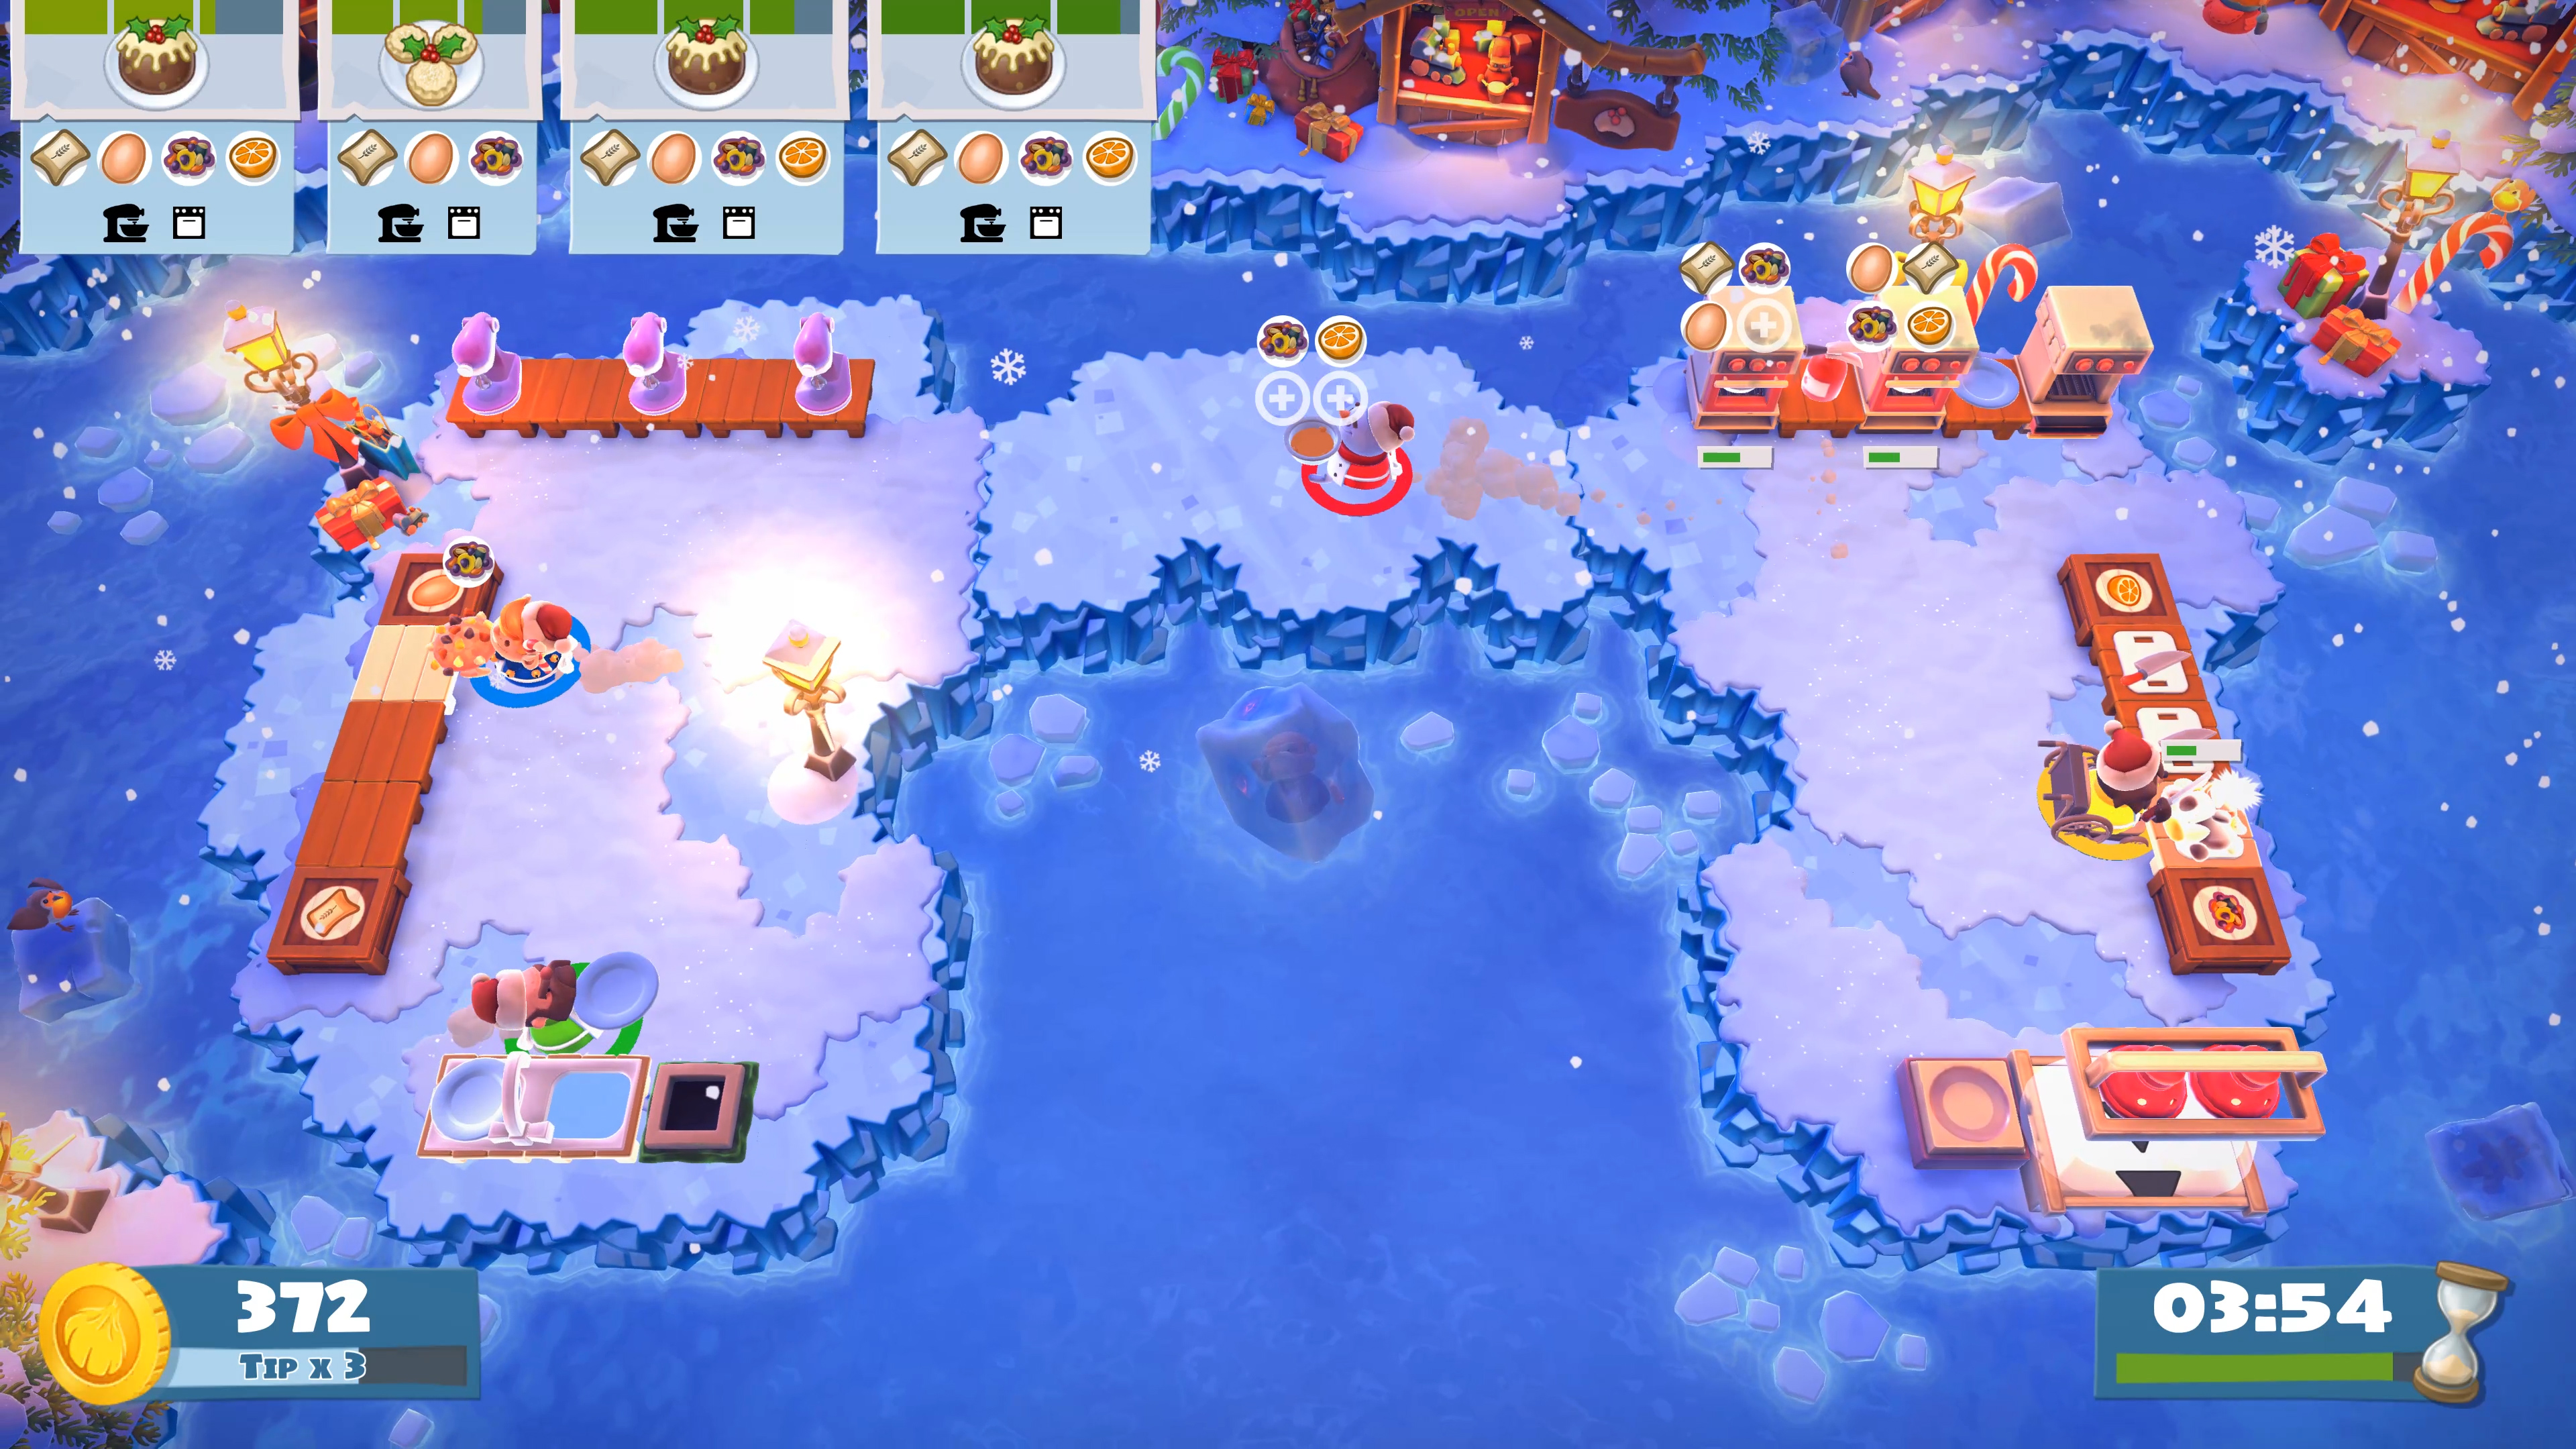 Overcooked 2 Free Holiday Update Dec 2018 #2